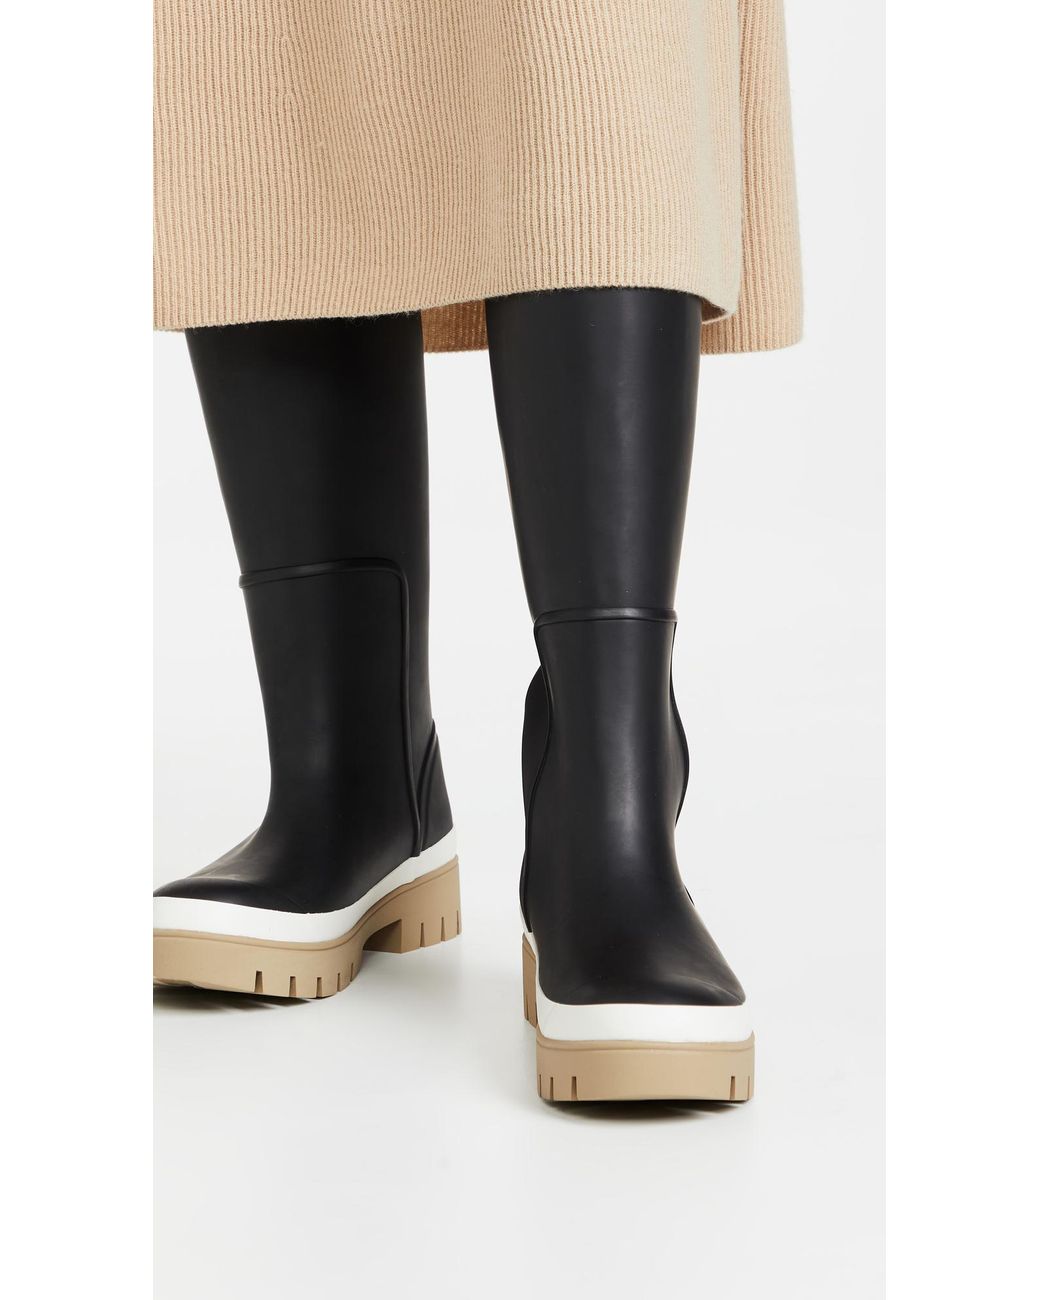 Tory Burch Foul Weather Tall Boots in Black | Lyst